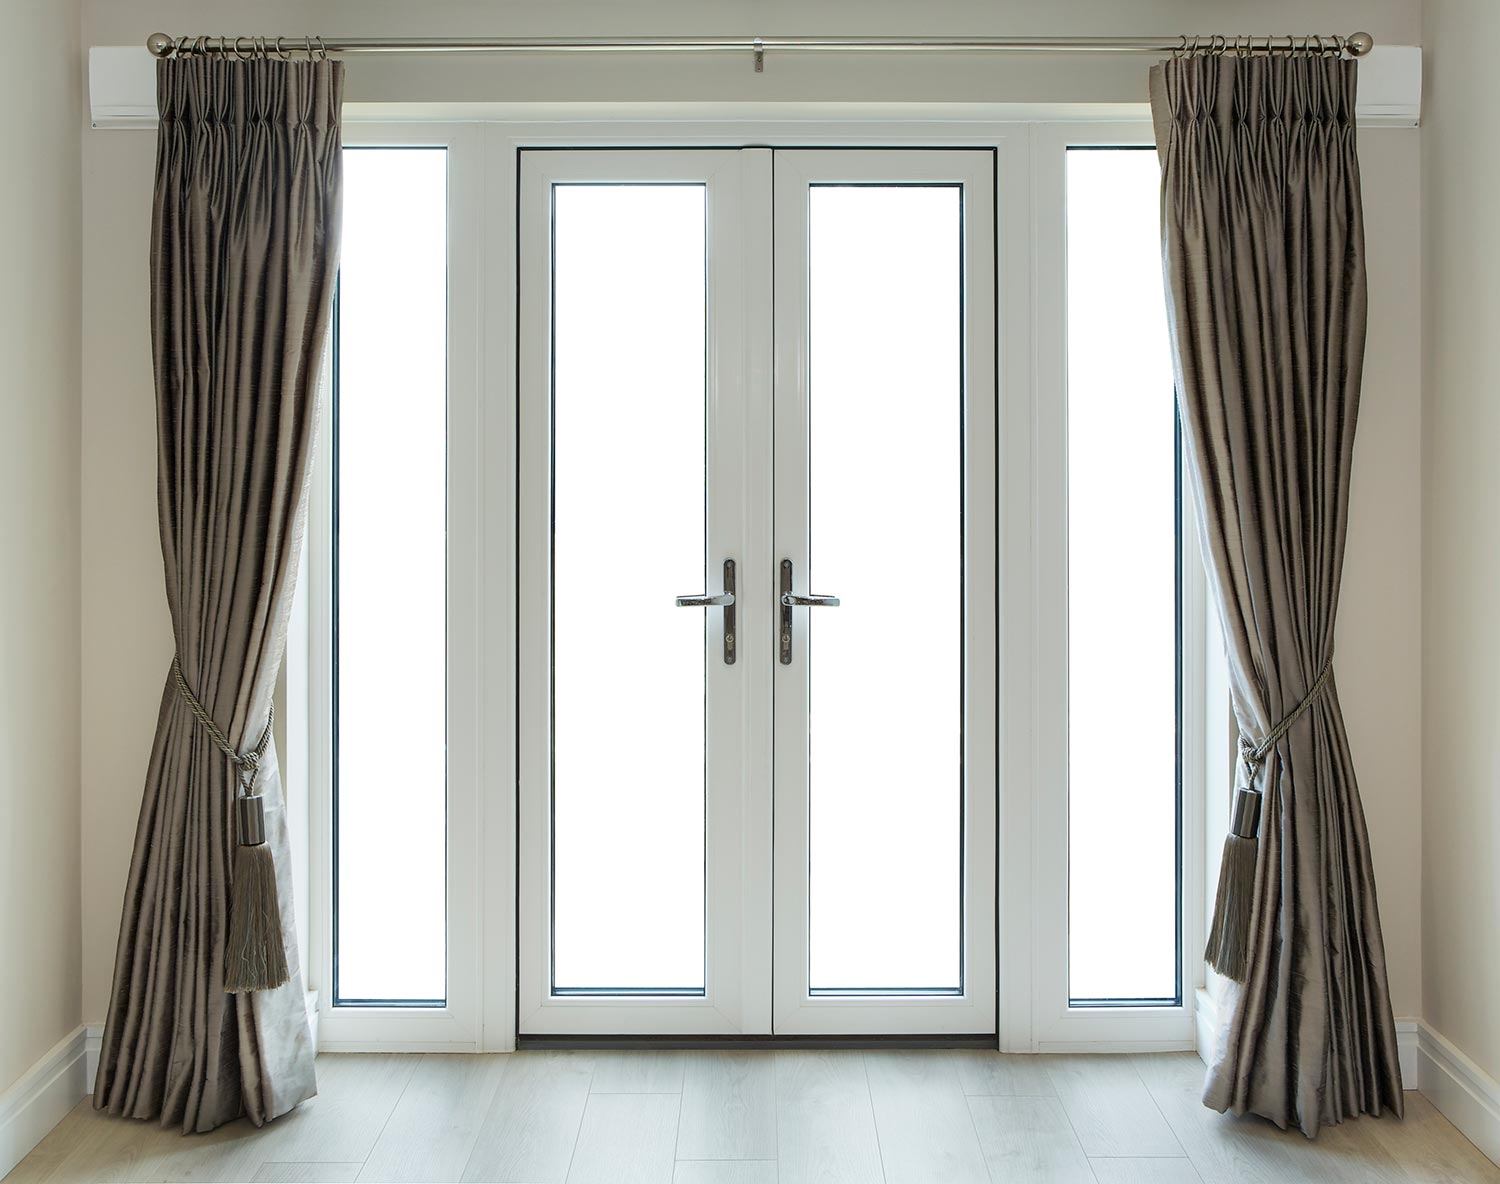 French doors with clipping path